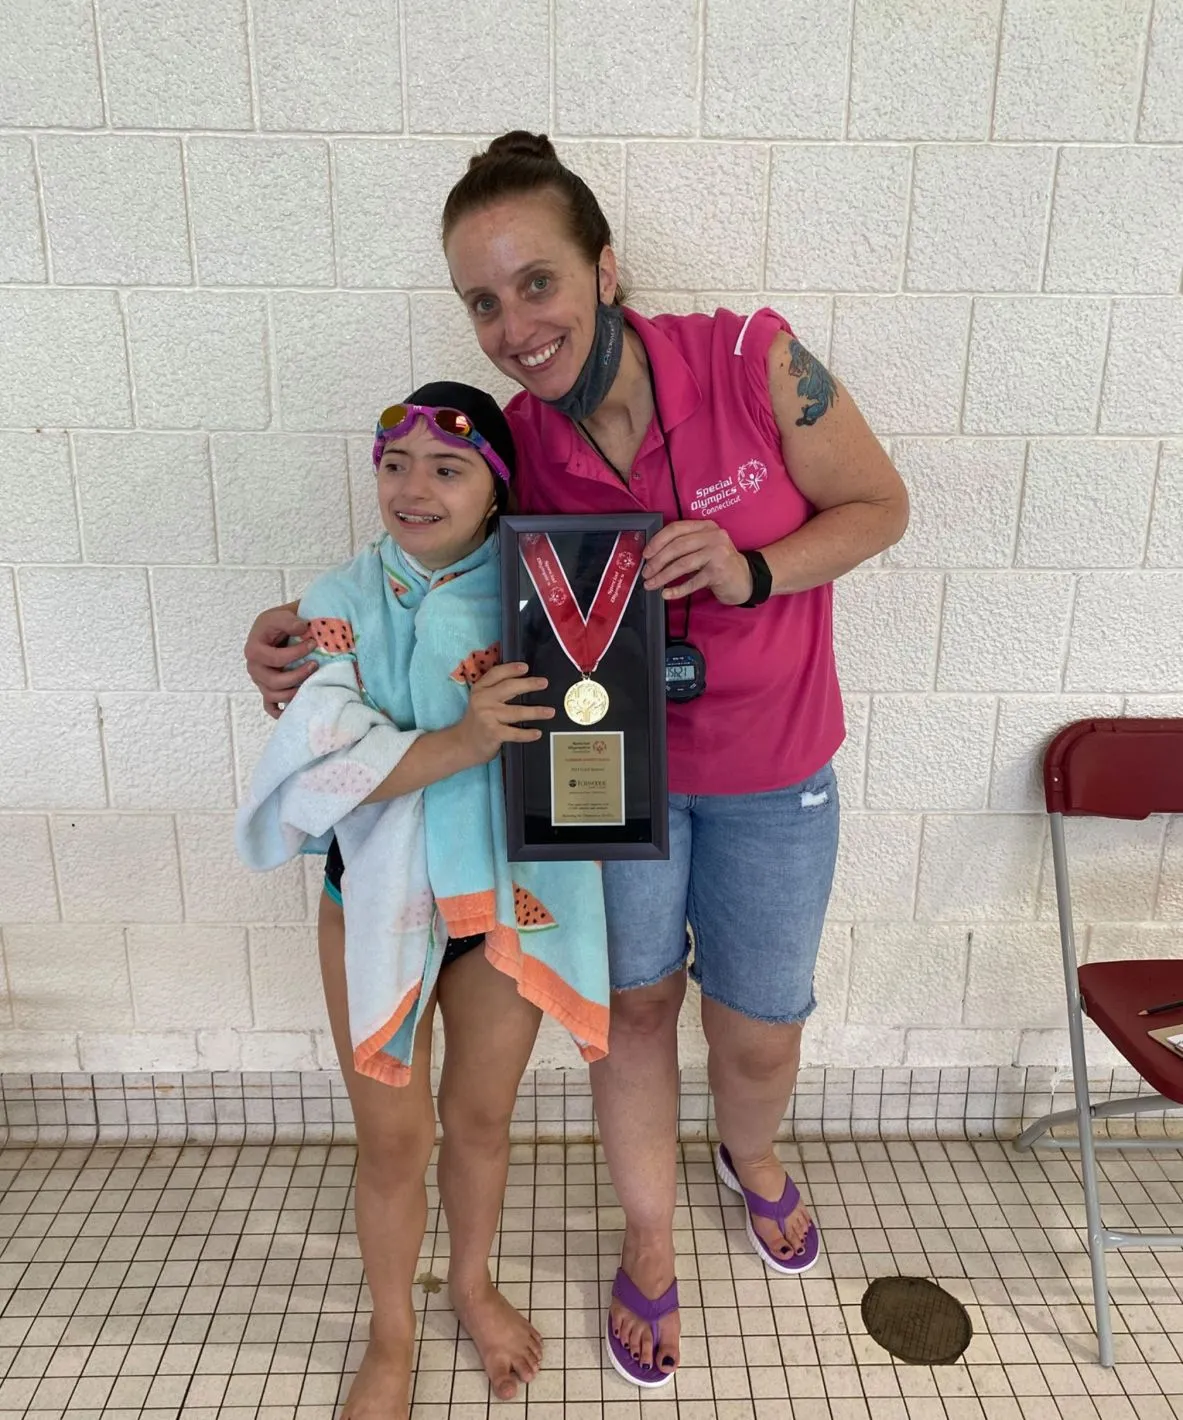 Female coach and youth swim athlete smiling holding a framed metal together.